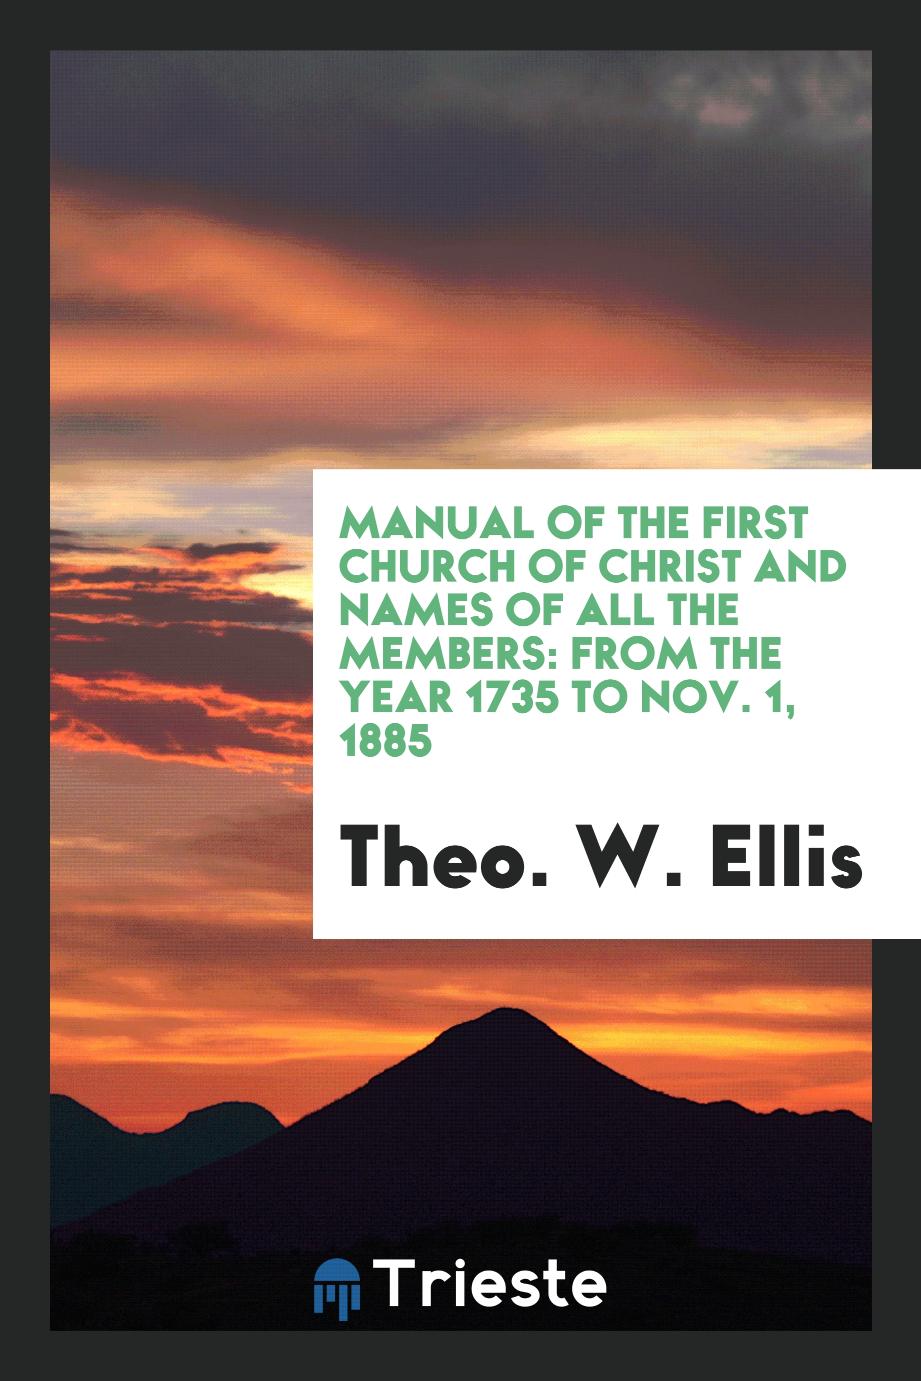 Manual of the First Church of Christ and Names of All the Members: From the Year 1735 to Nov. 1, 1885